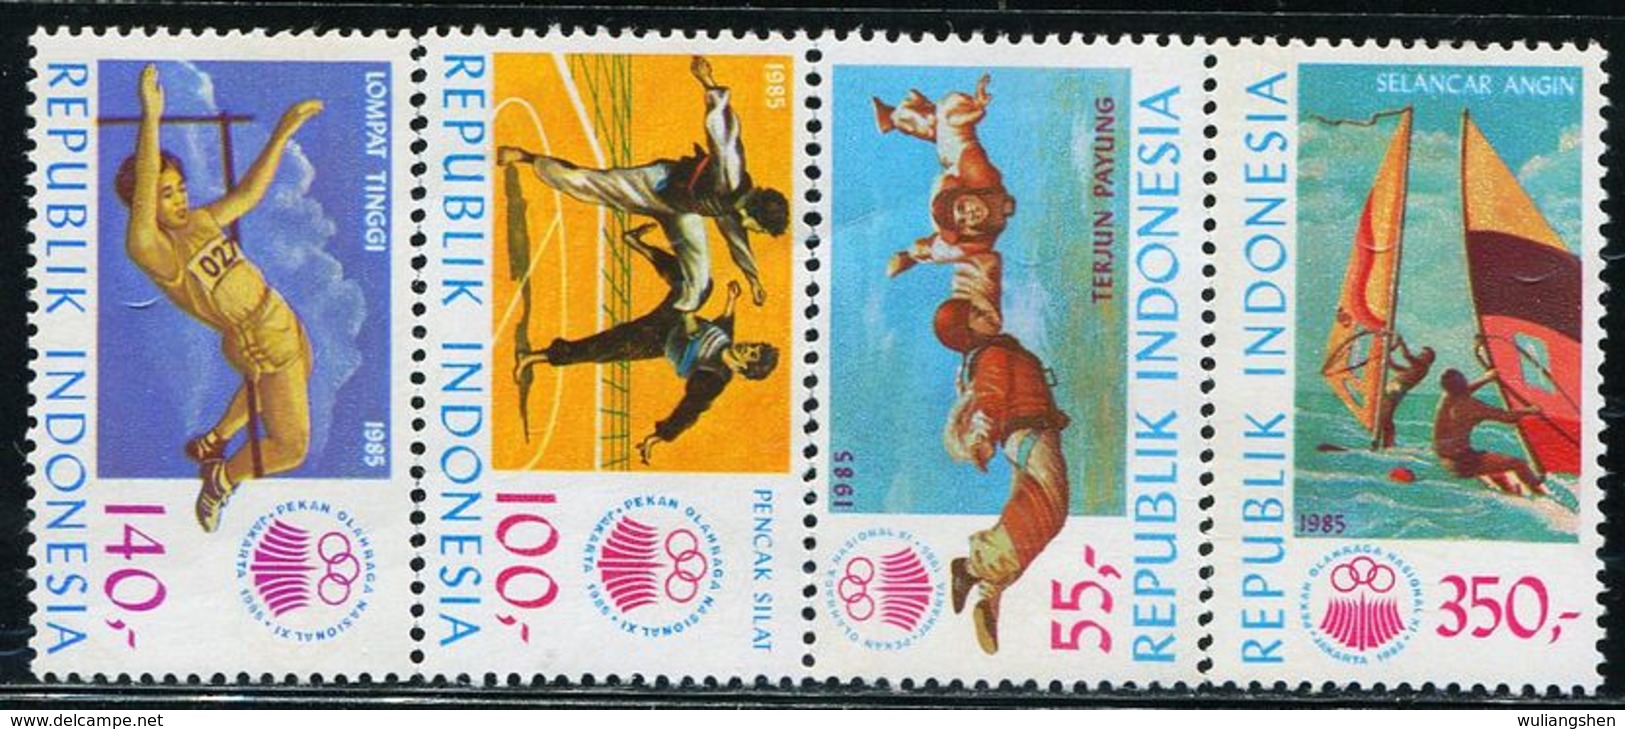 AT3746 Indonesia 1985 Channel Games High Jump Skydiving And Other 4VMNH - Jumping